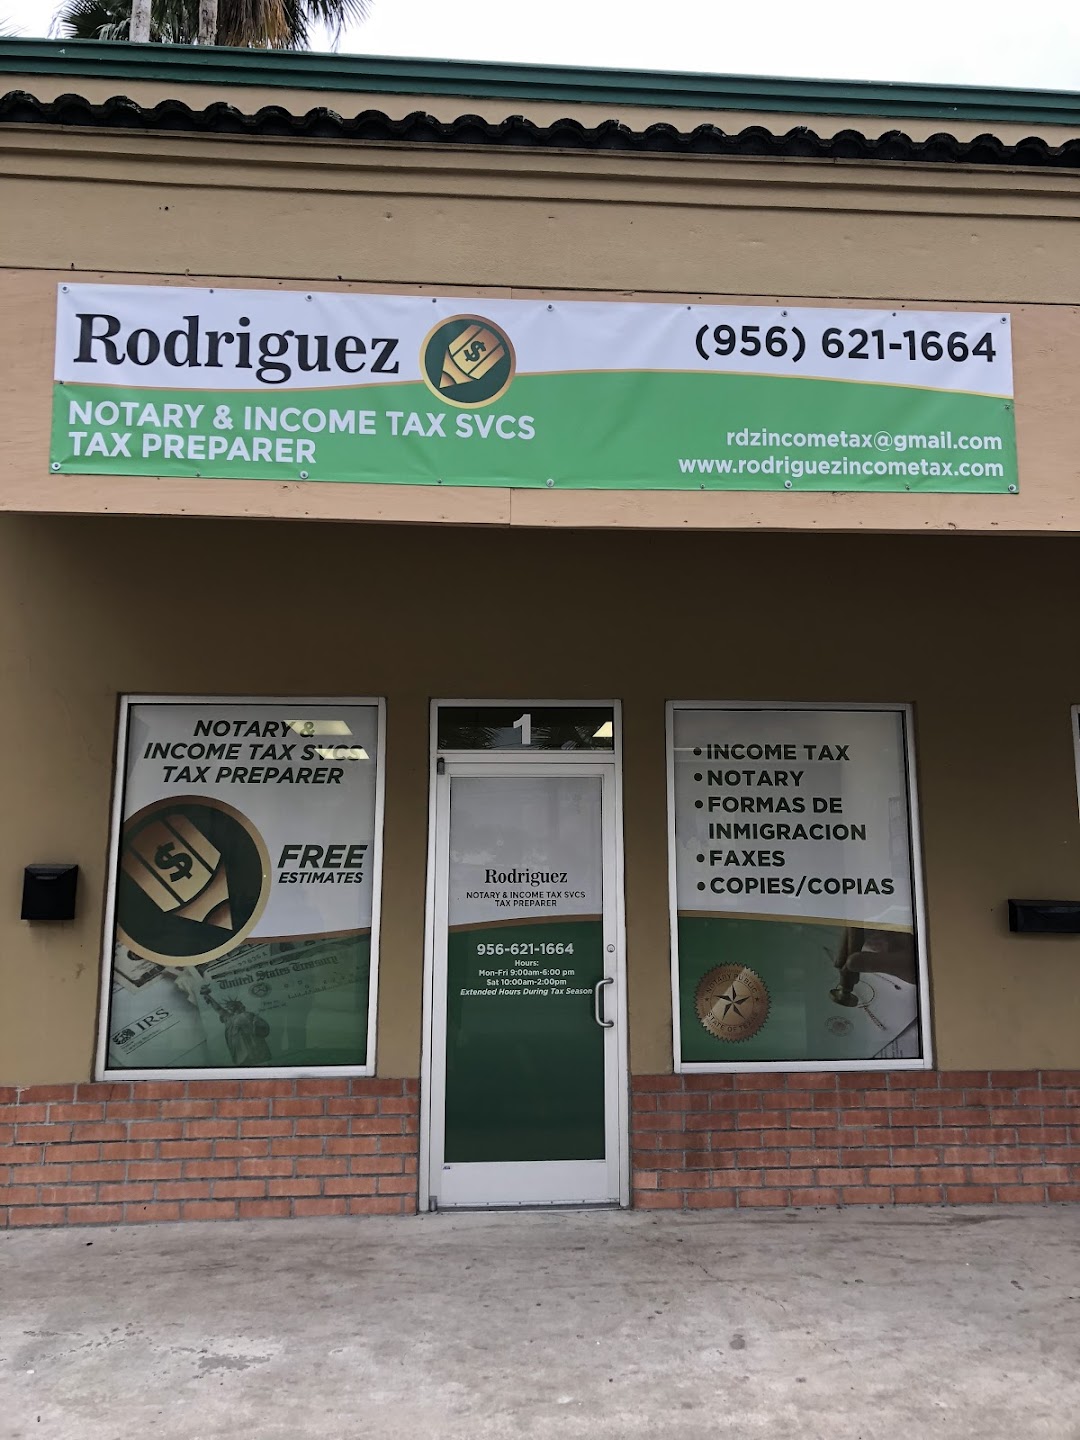 Rodriguez Notary & Income Tax Svcs